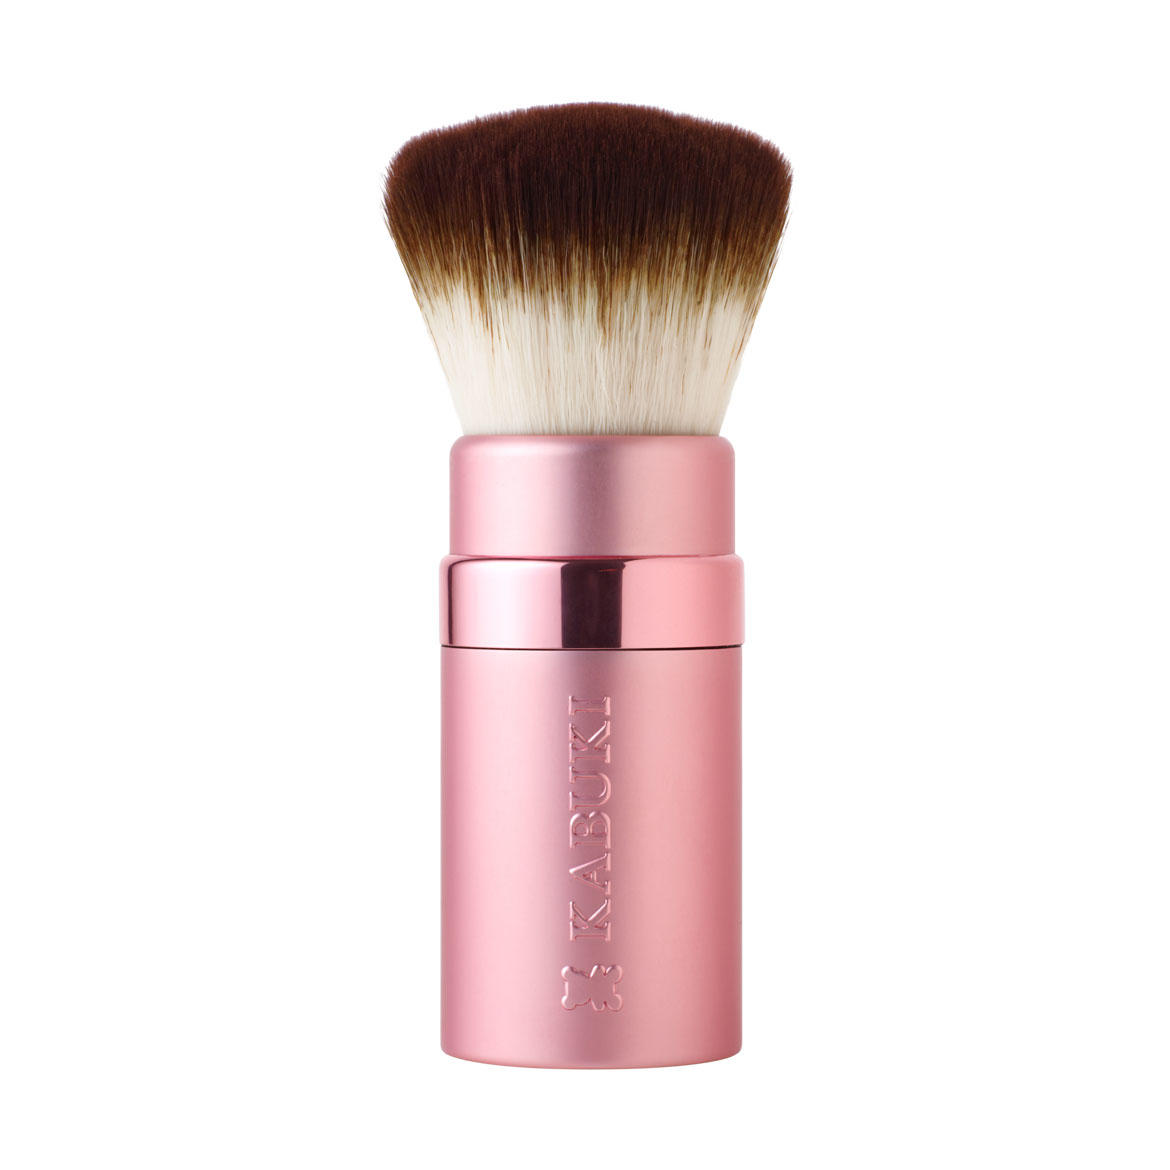 Too Faced Special Edition Retractable Kabuki Brush